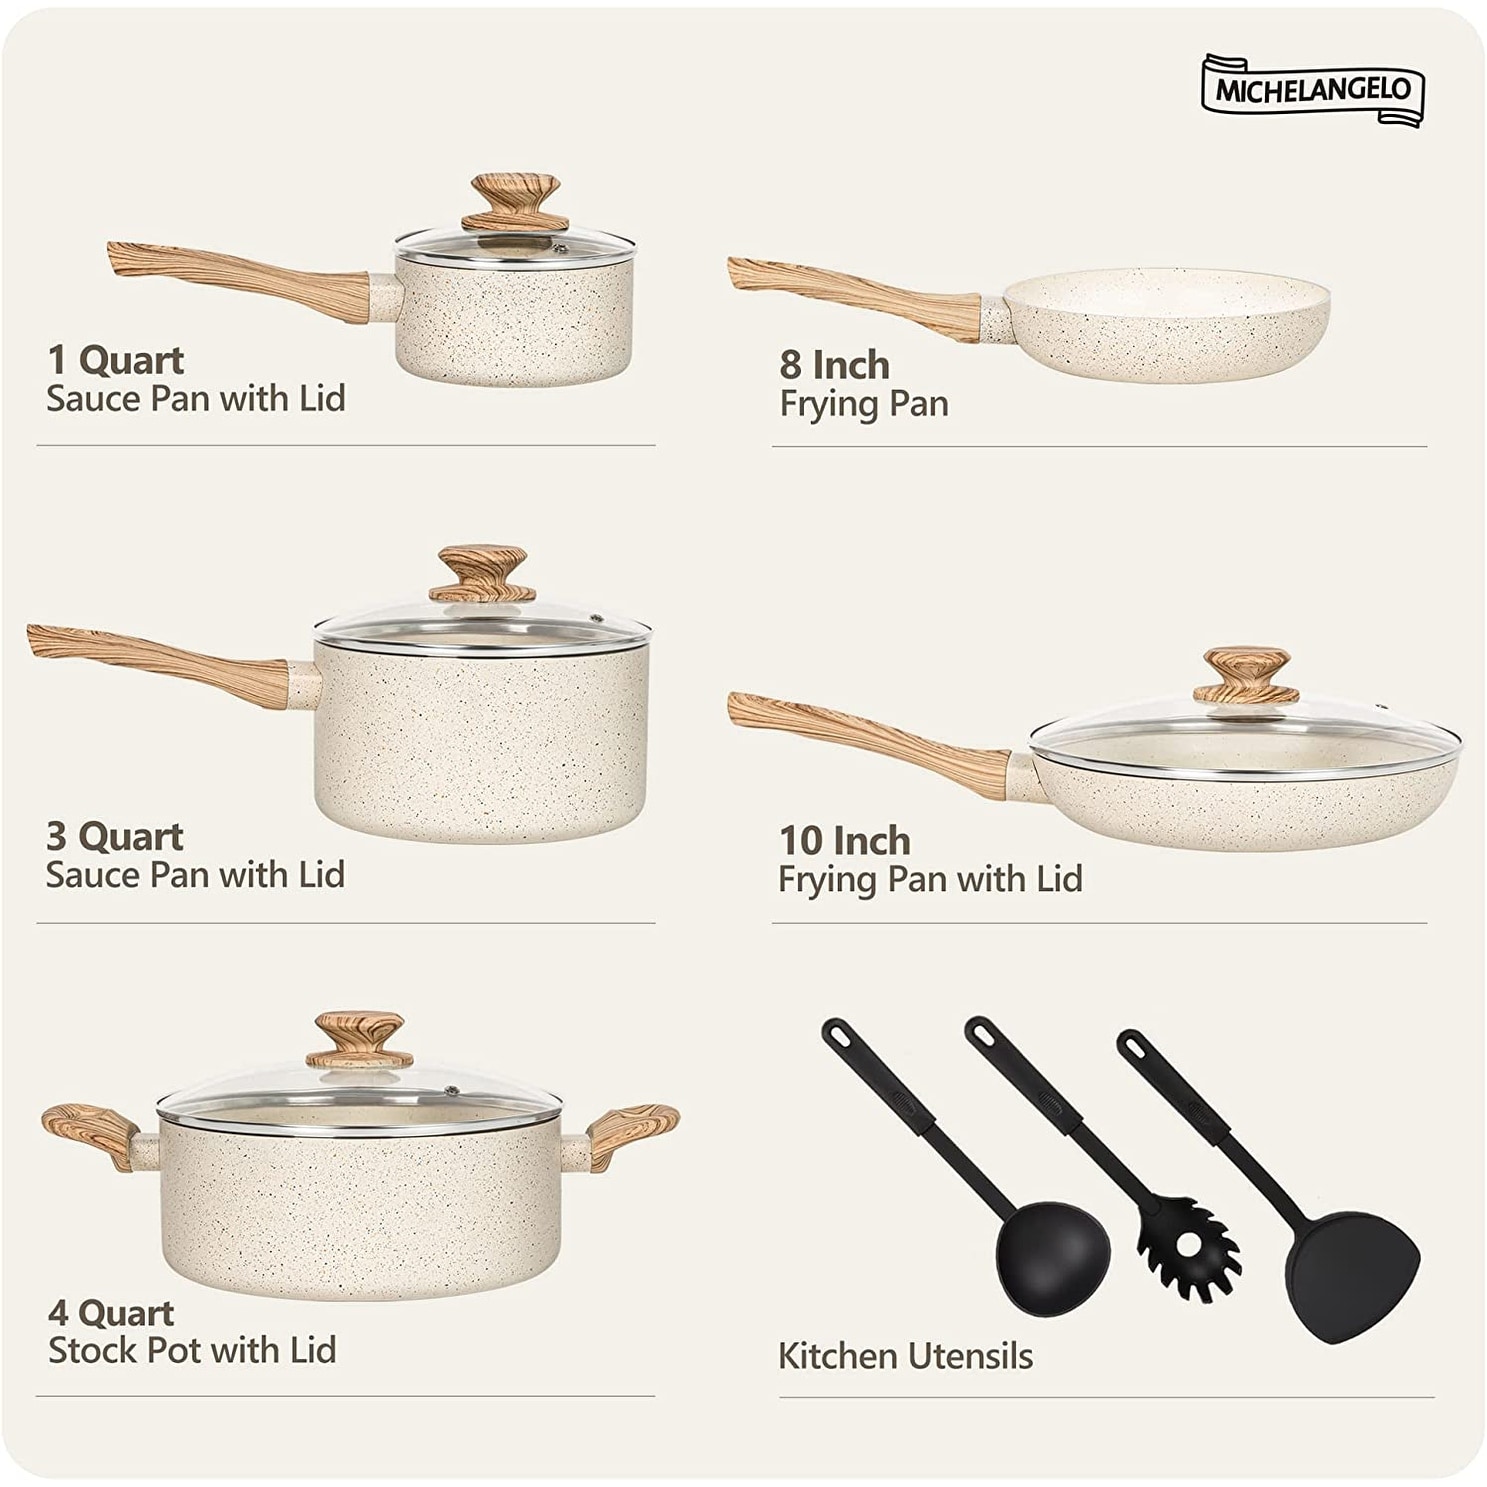 https://ak1.ostkcdn.com/images/products/is/images/direct/23c04376c36547c022dd13af8c29b6a120b66060/White-Pots-and-Pans-Set-Nonstick-Cookware-Sets%2C-12pcs-White-Granite-Cookware-Set-Induction-Compatible.jpg